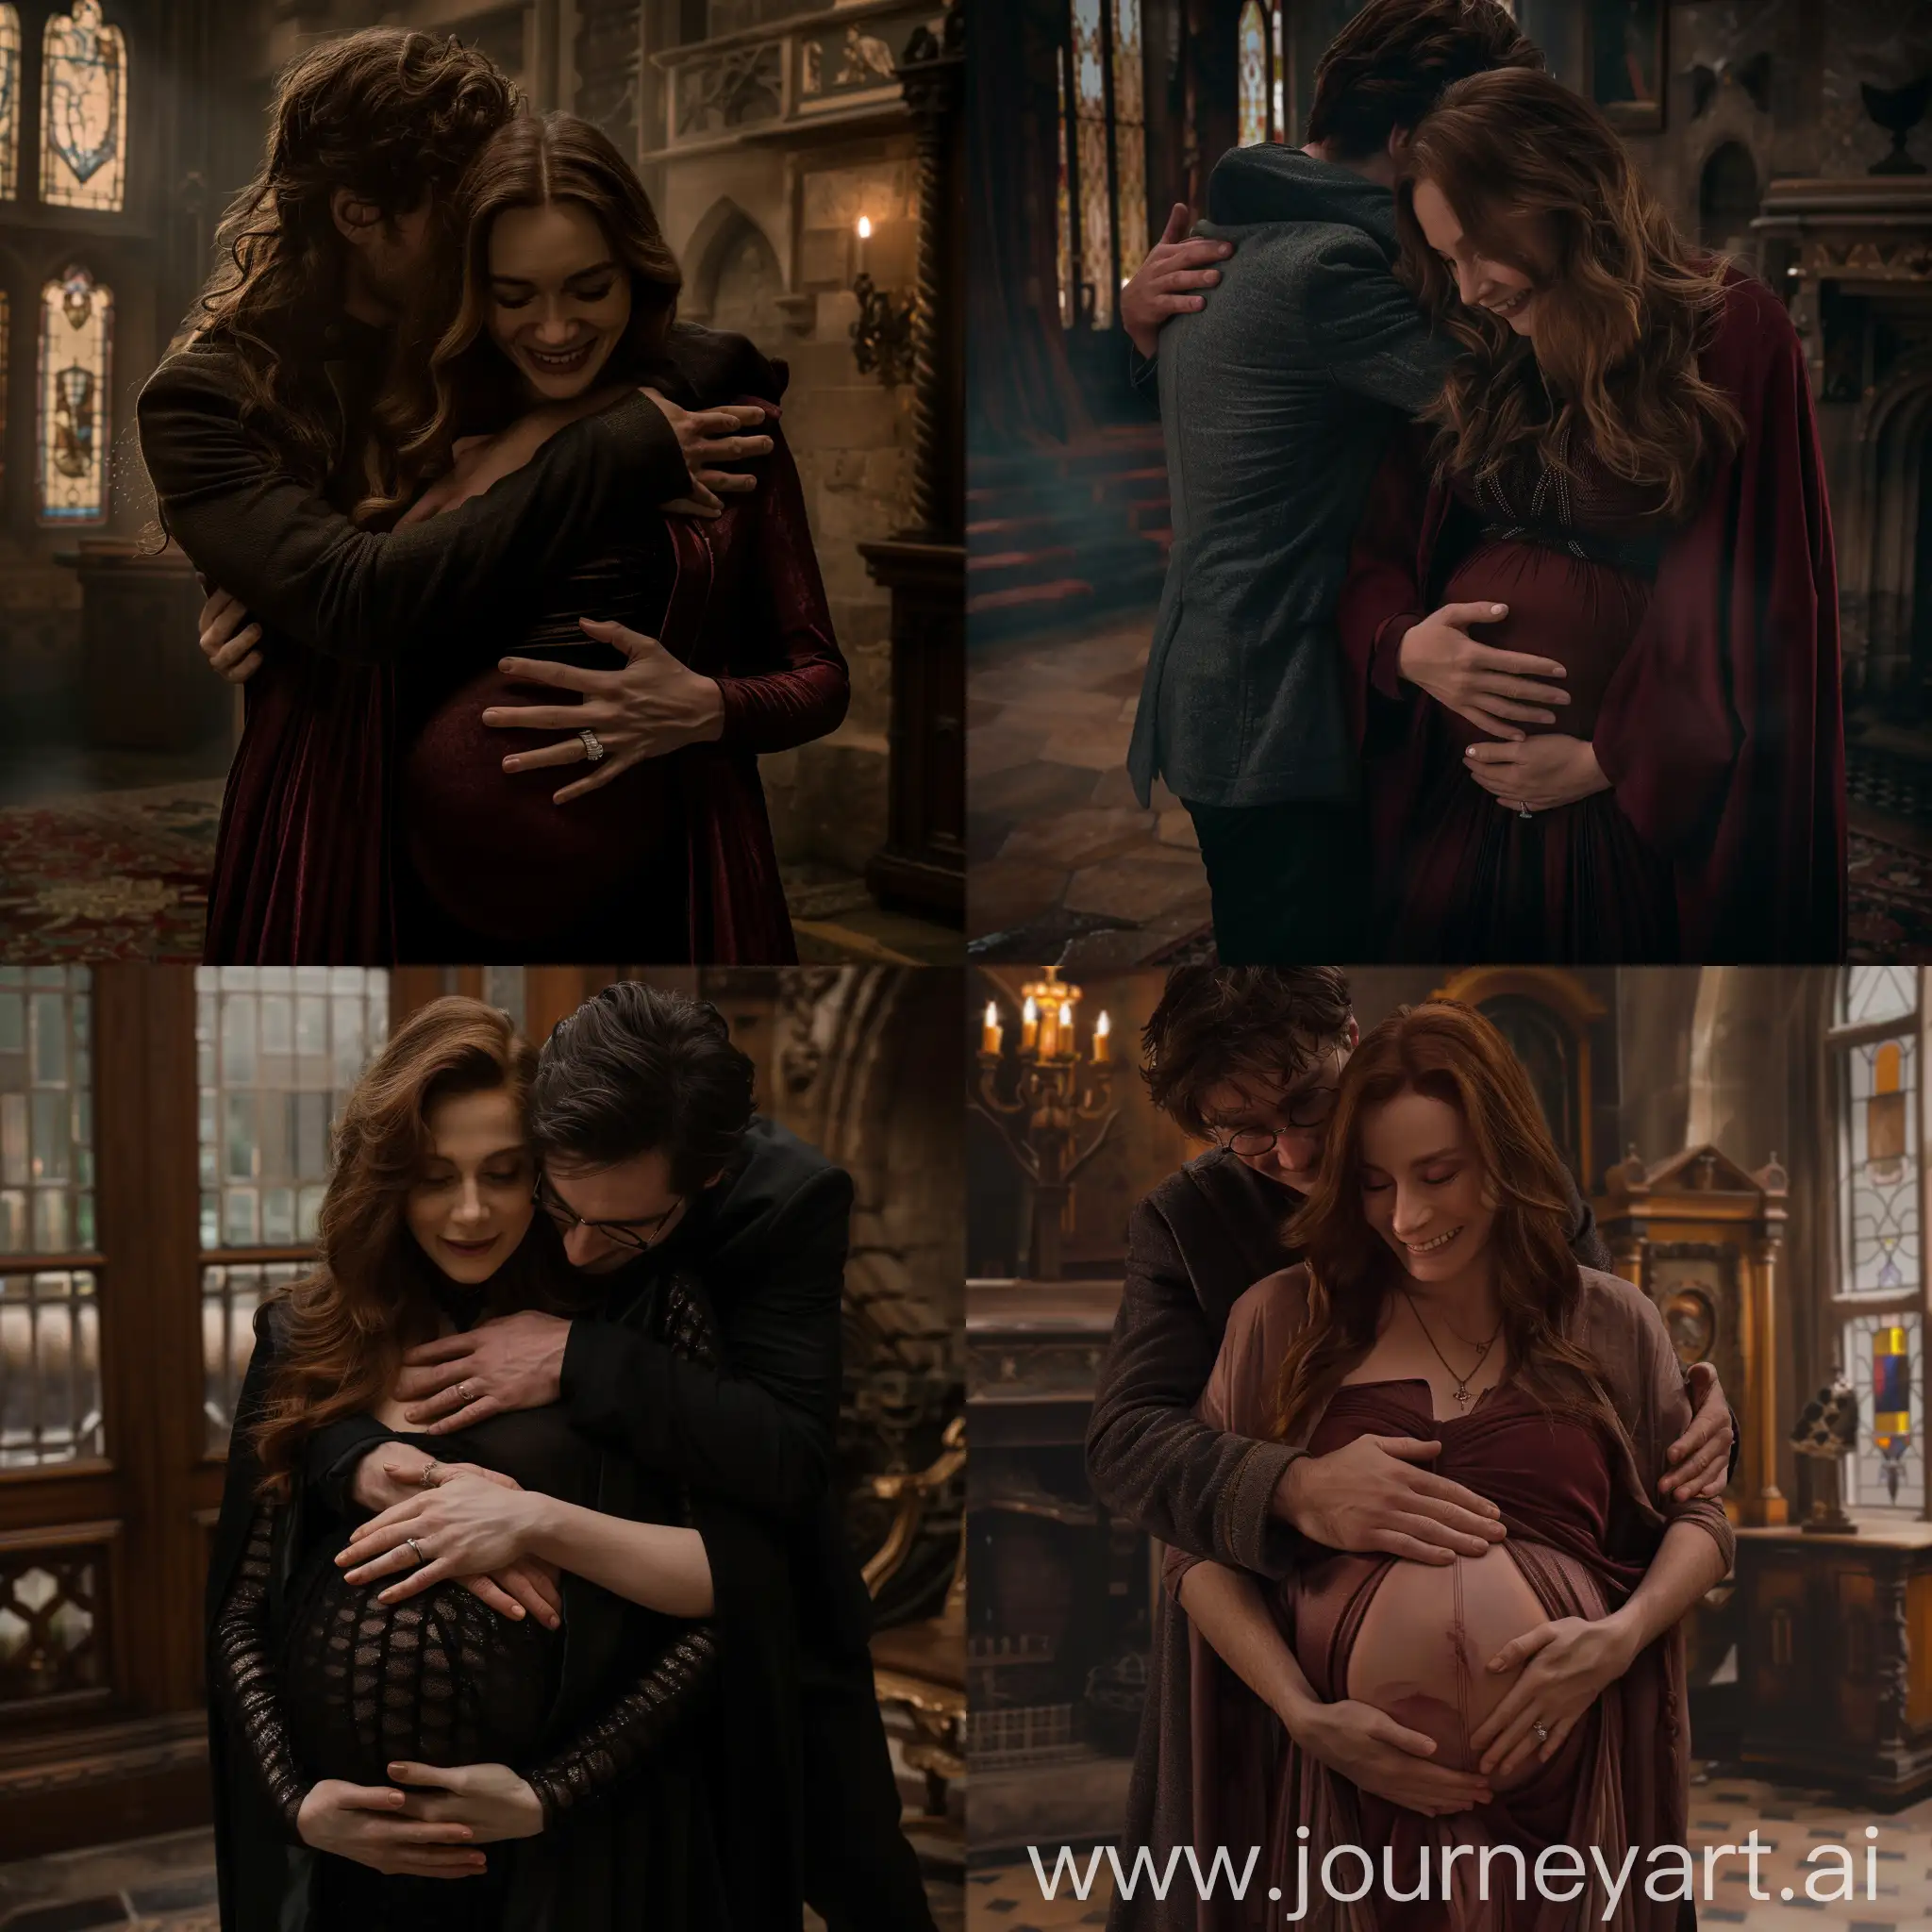 Joyful-Pregnancy-Wanda-Maximoff-Embraced-by-Harry-Potter-in-a-Luxurious-Mansion